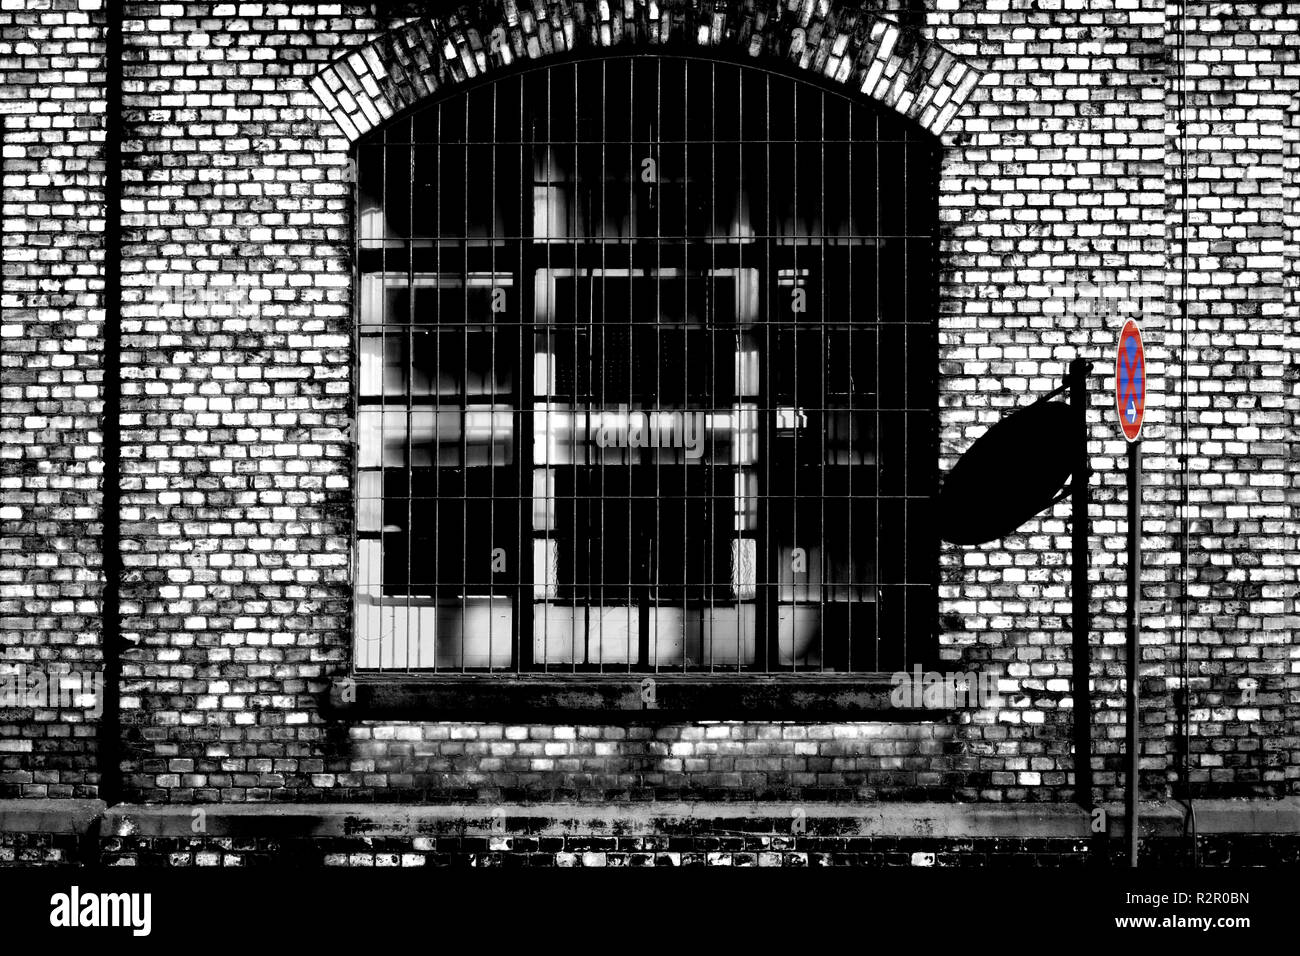 Closed industrial estate, 'No stopping' sign casting shadow on brick wall of old factory building, barred windows Stock Photo